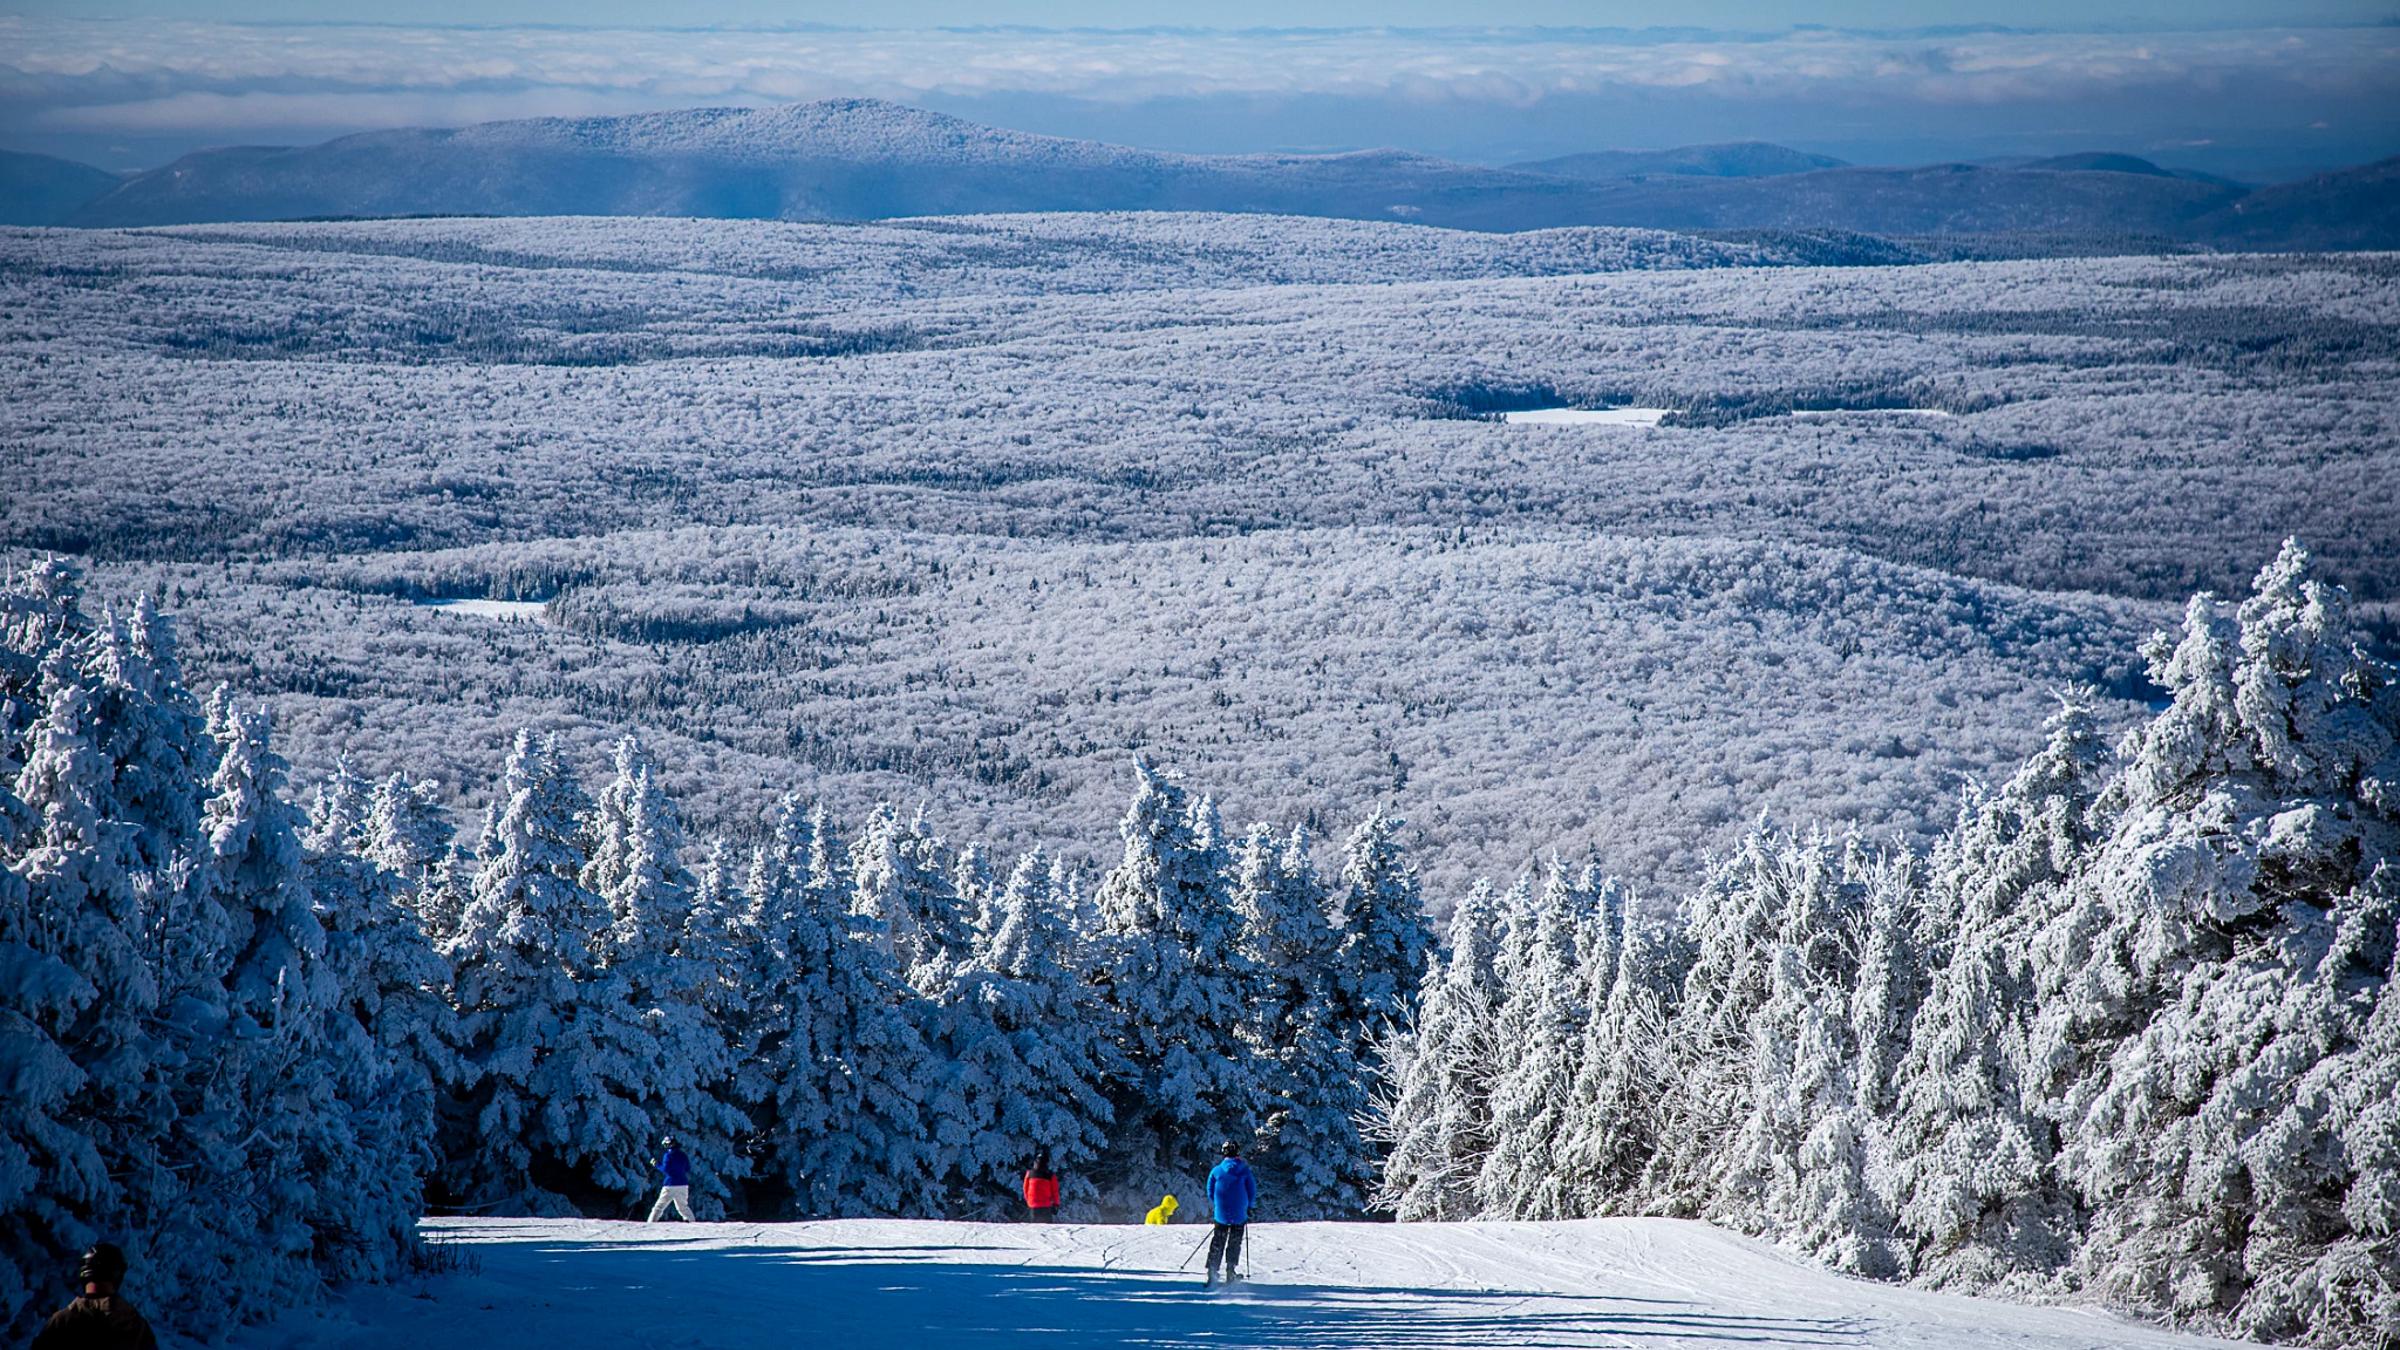 Hours of Operation for Stratton Mountain Resort in Vermont